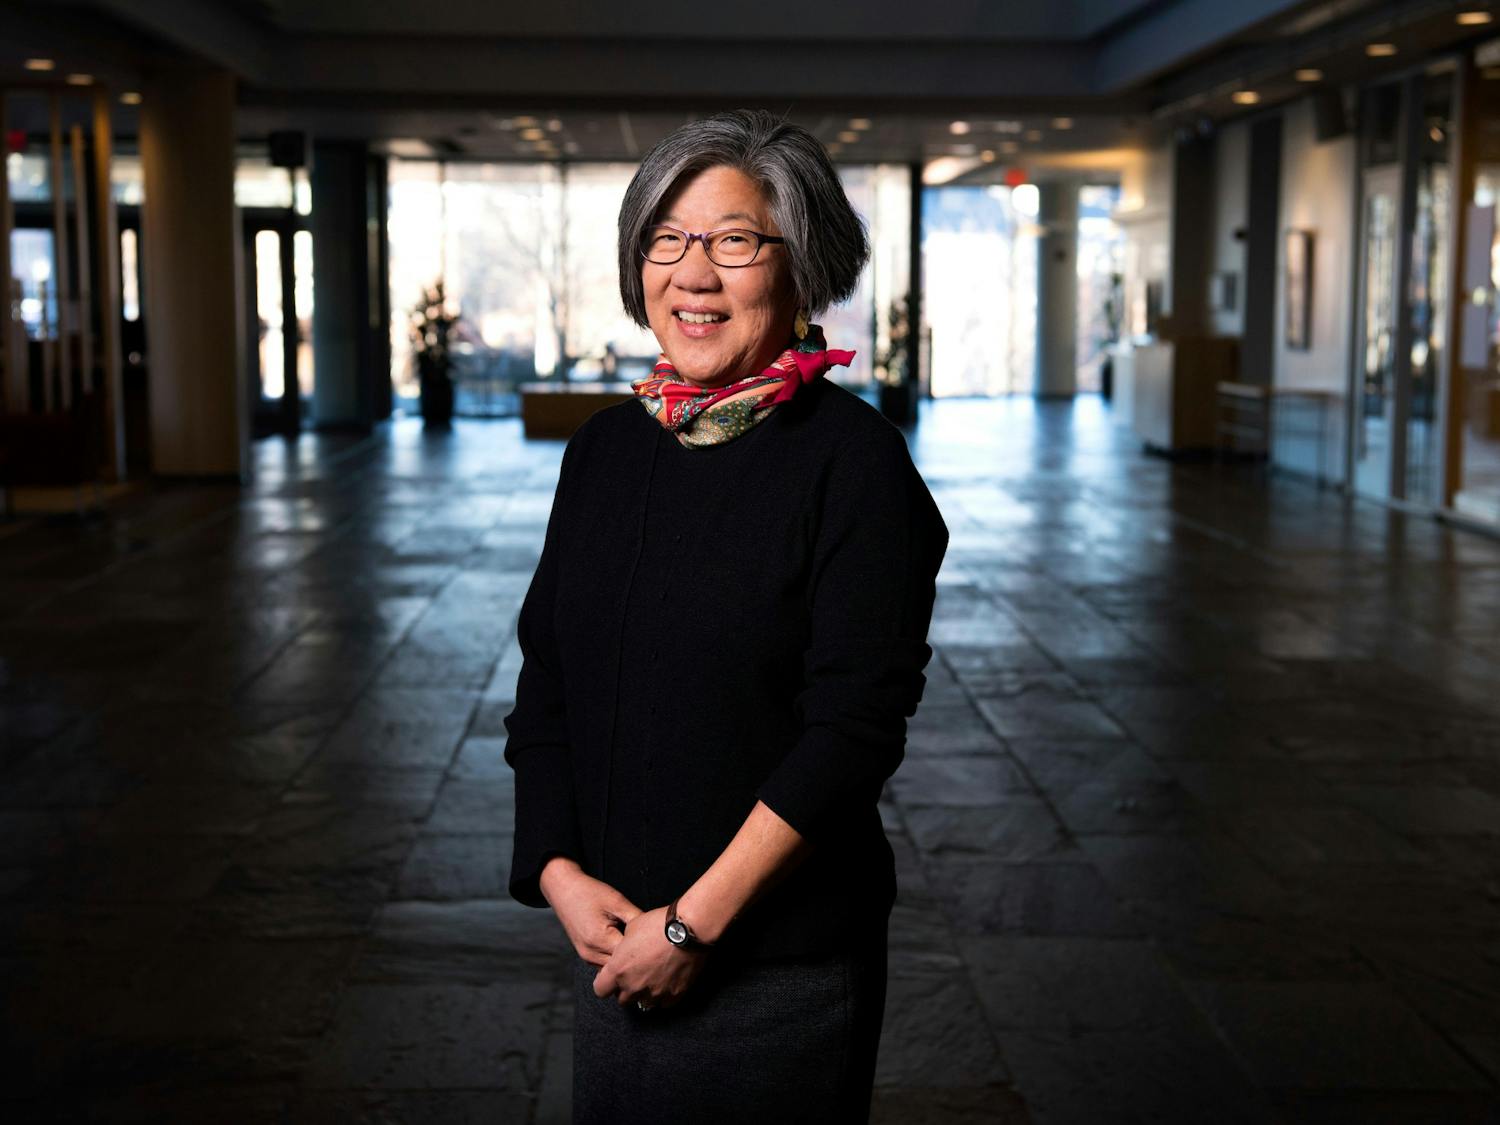 Anna Wu, who has worked at the University for nearly 30 years, poses inside the foyer of the FedEx Global Education Center. She is retiring as the associate vice chancellor for facility services.
Photo Courtesy of Jon Gardiner/UNC.